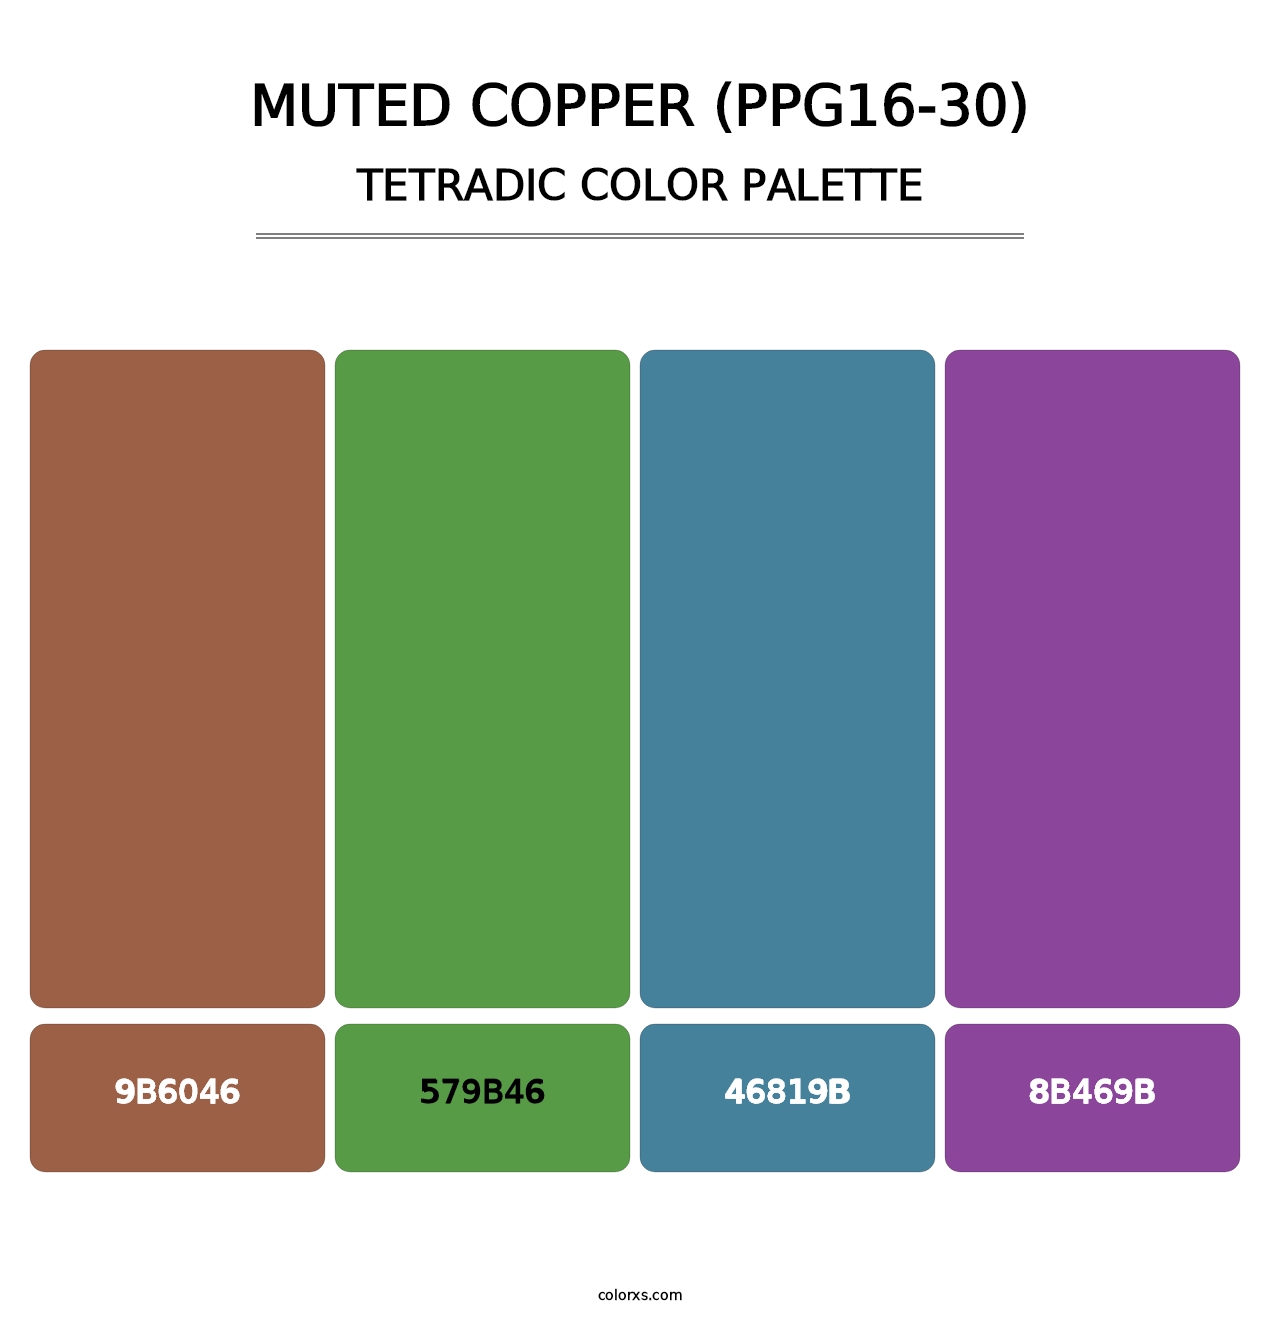 Muted Copper (PPG16-30) - Tetradic Color Palette